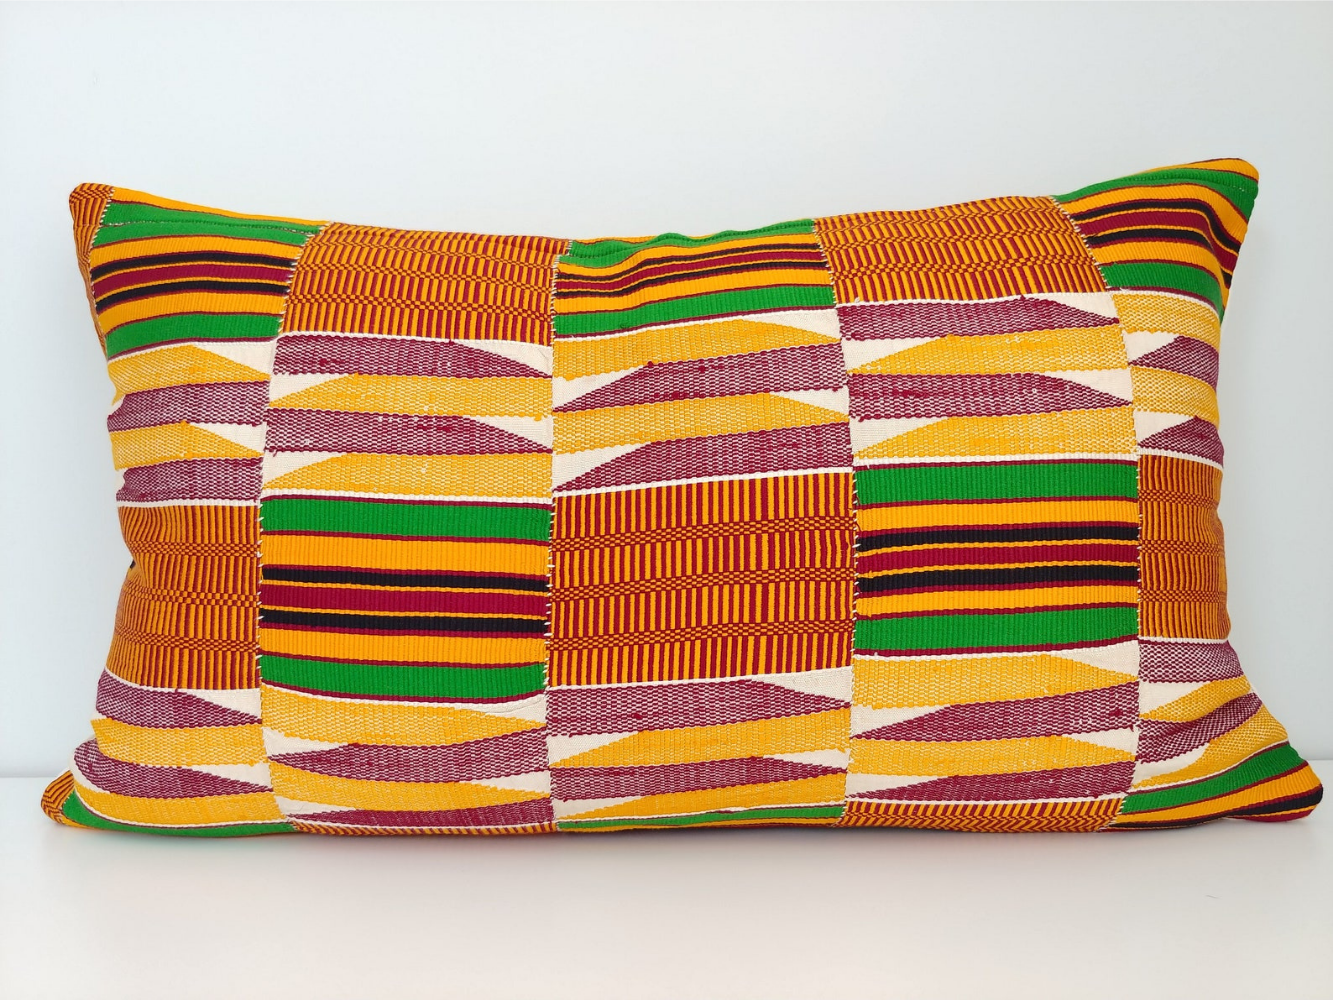 A gorgeous, geometric-patterned ewe kente pillowcase, also hailing from West Africa.